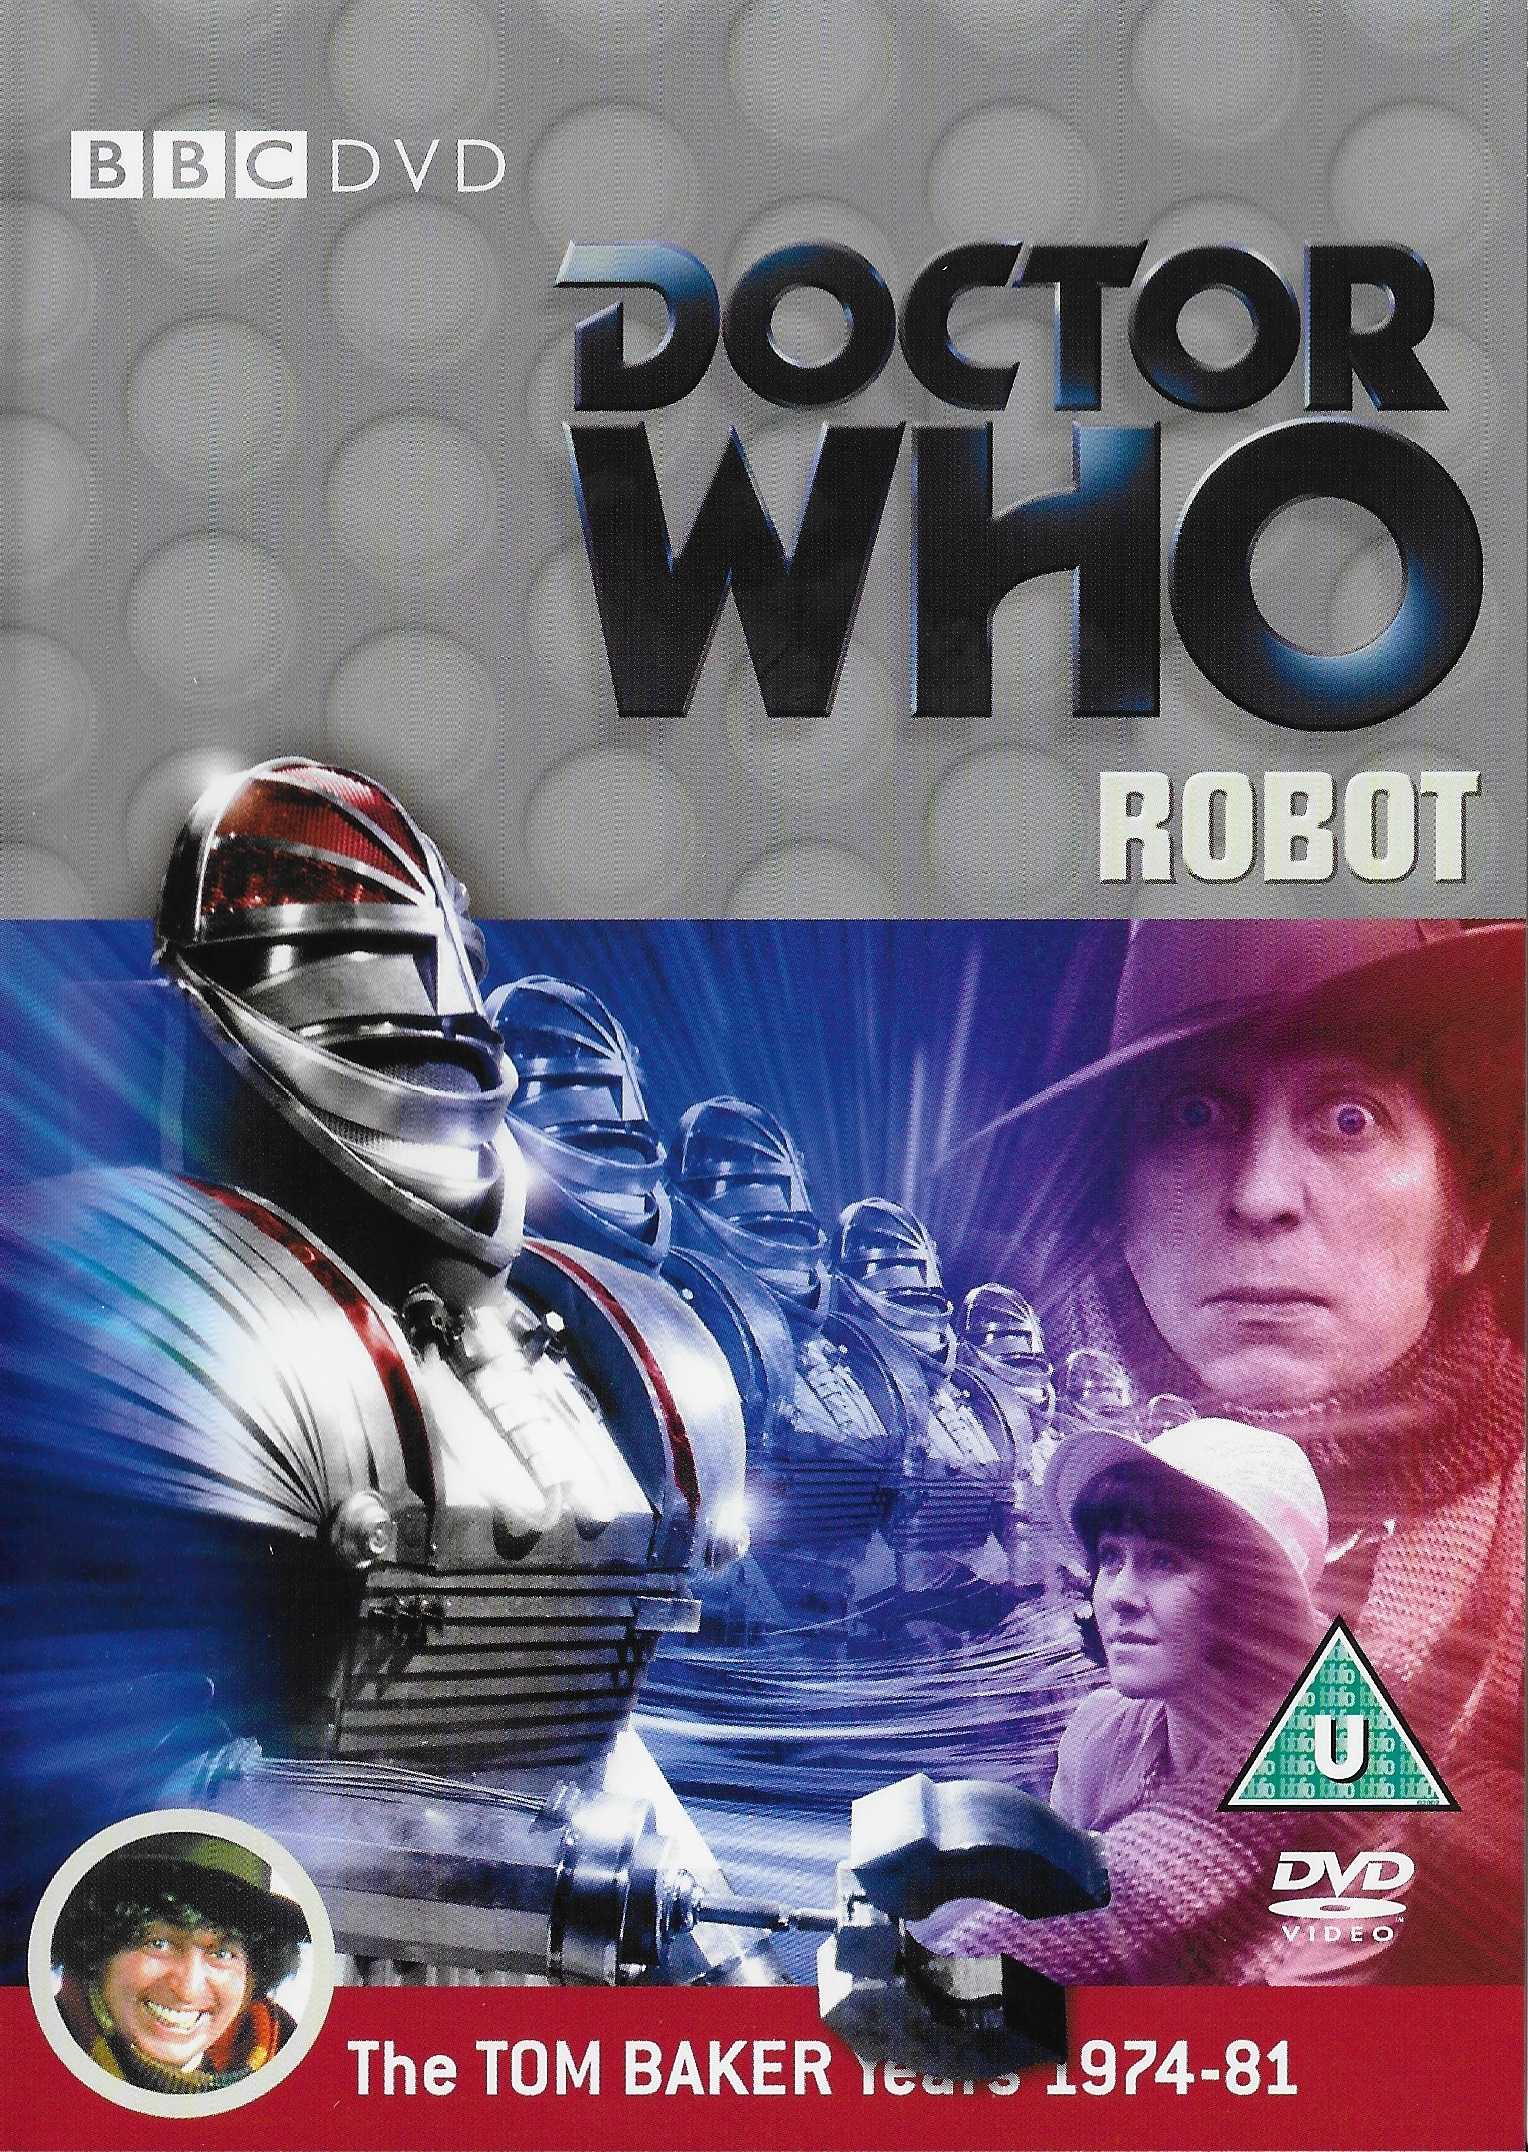 Picture of BBCDVD 2332 Doctor Who - Robot by artist Terrance Dicks from the BBC dvds - Records and Tapes library